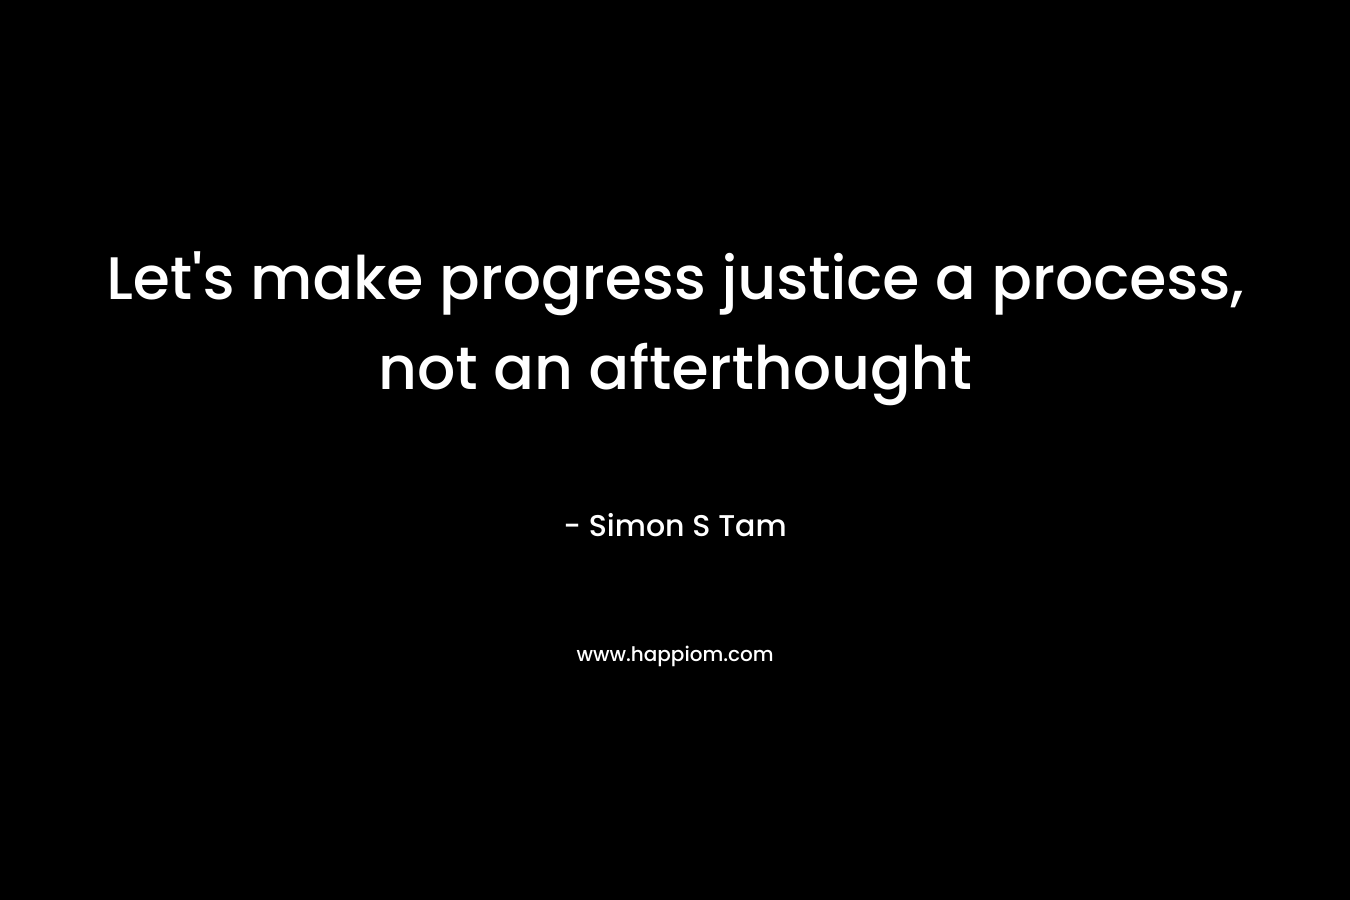 Let's make progress justice a process, not an afterthought